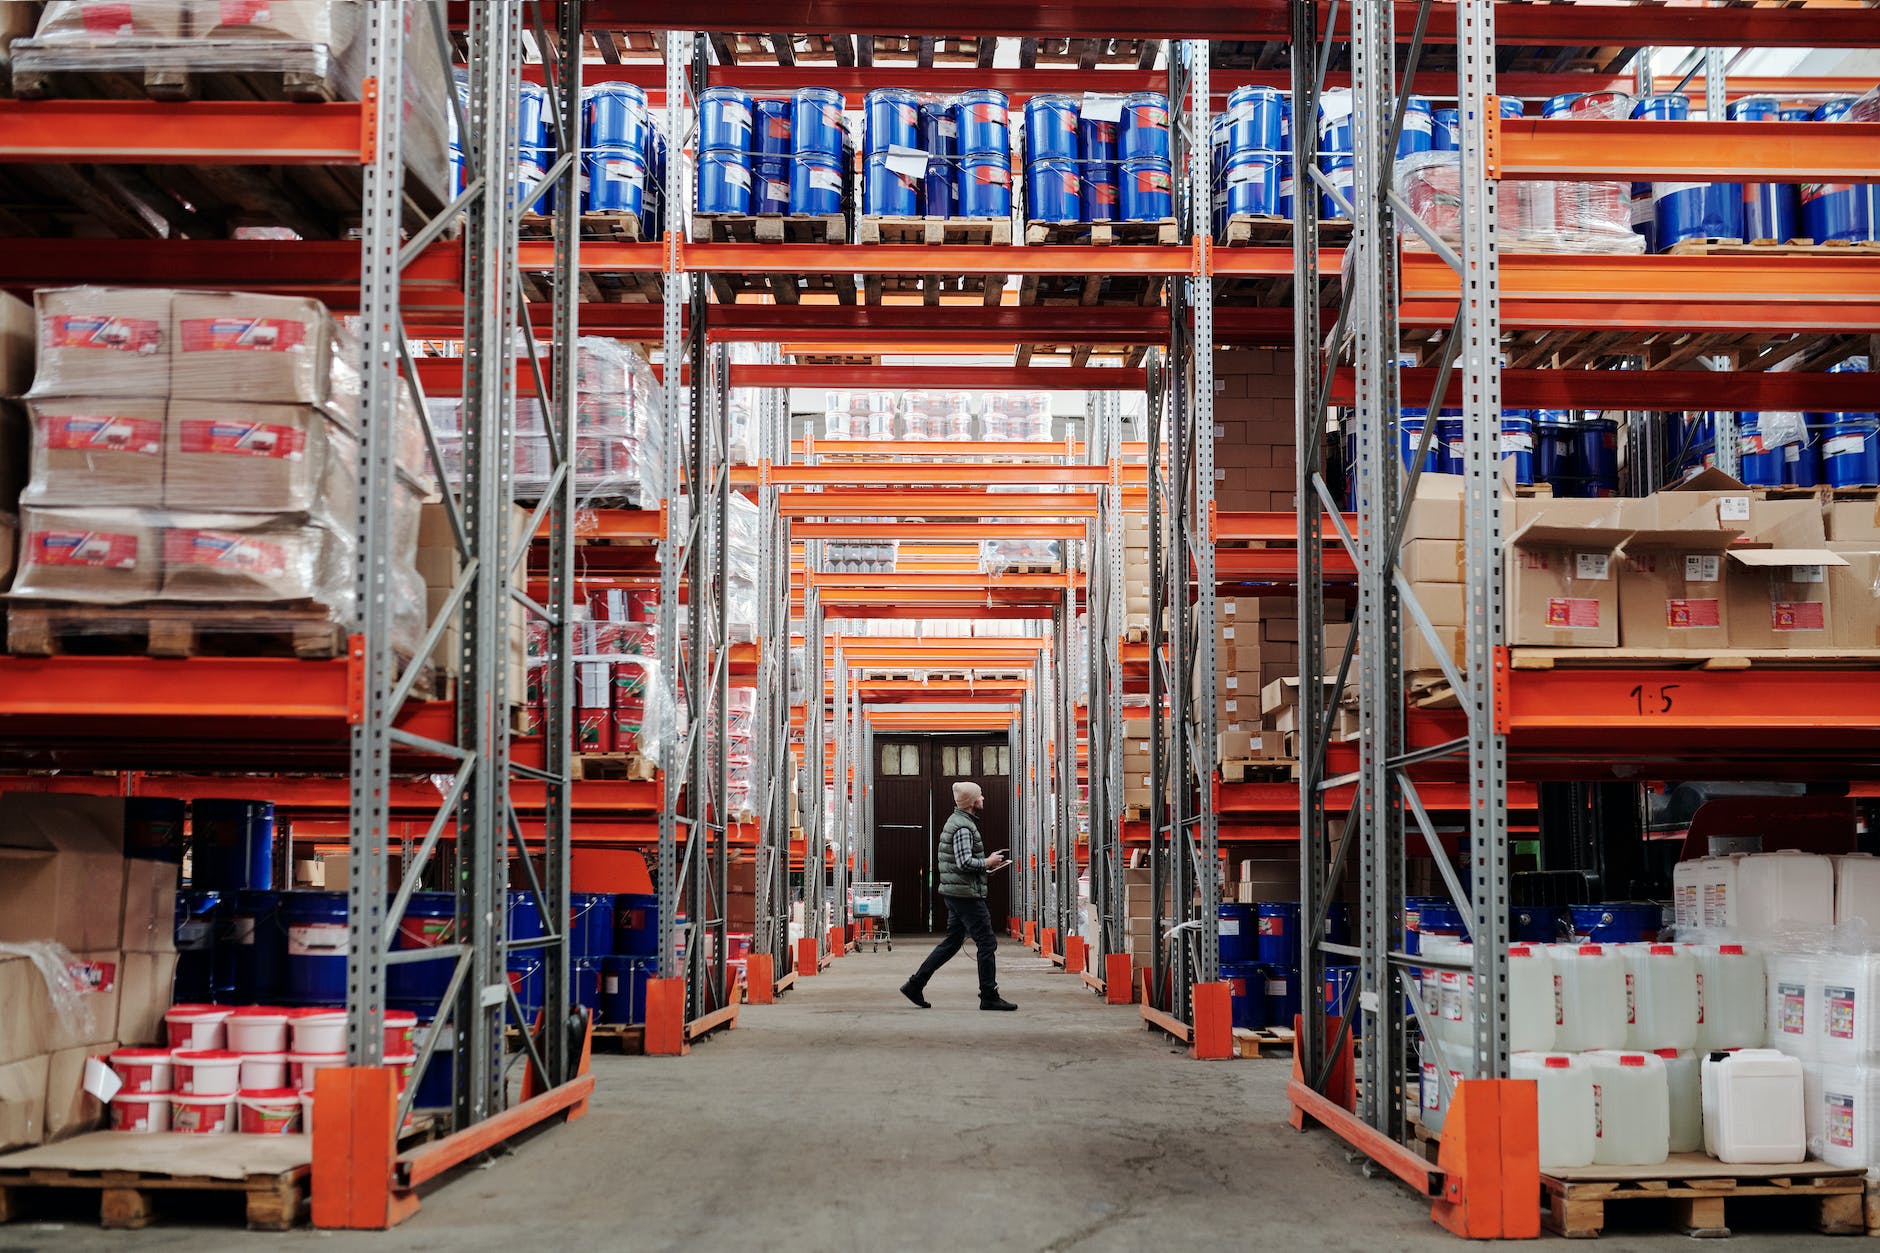 city industry factory warehouse showing amazon products stocked up